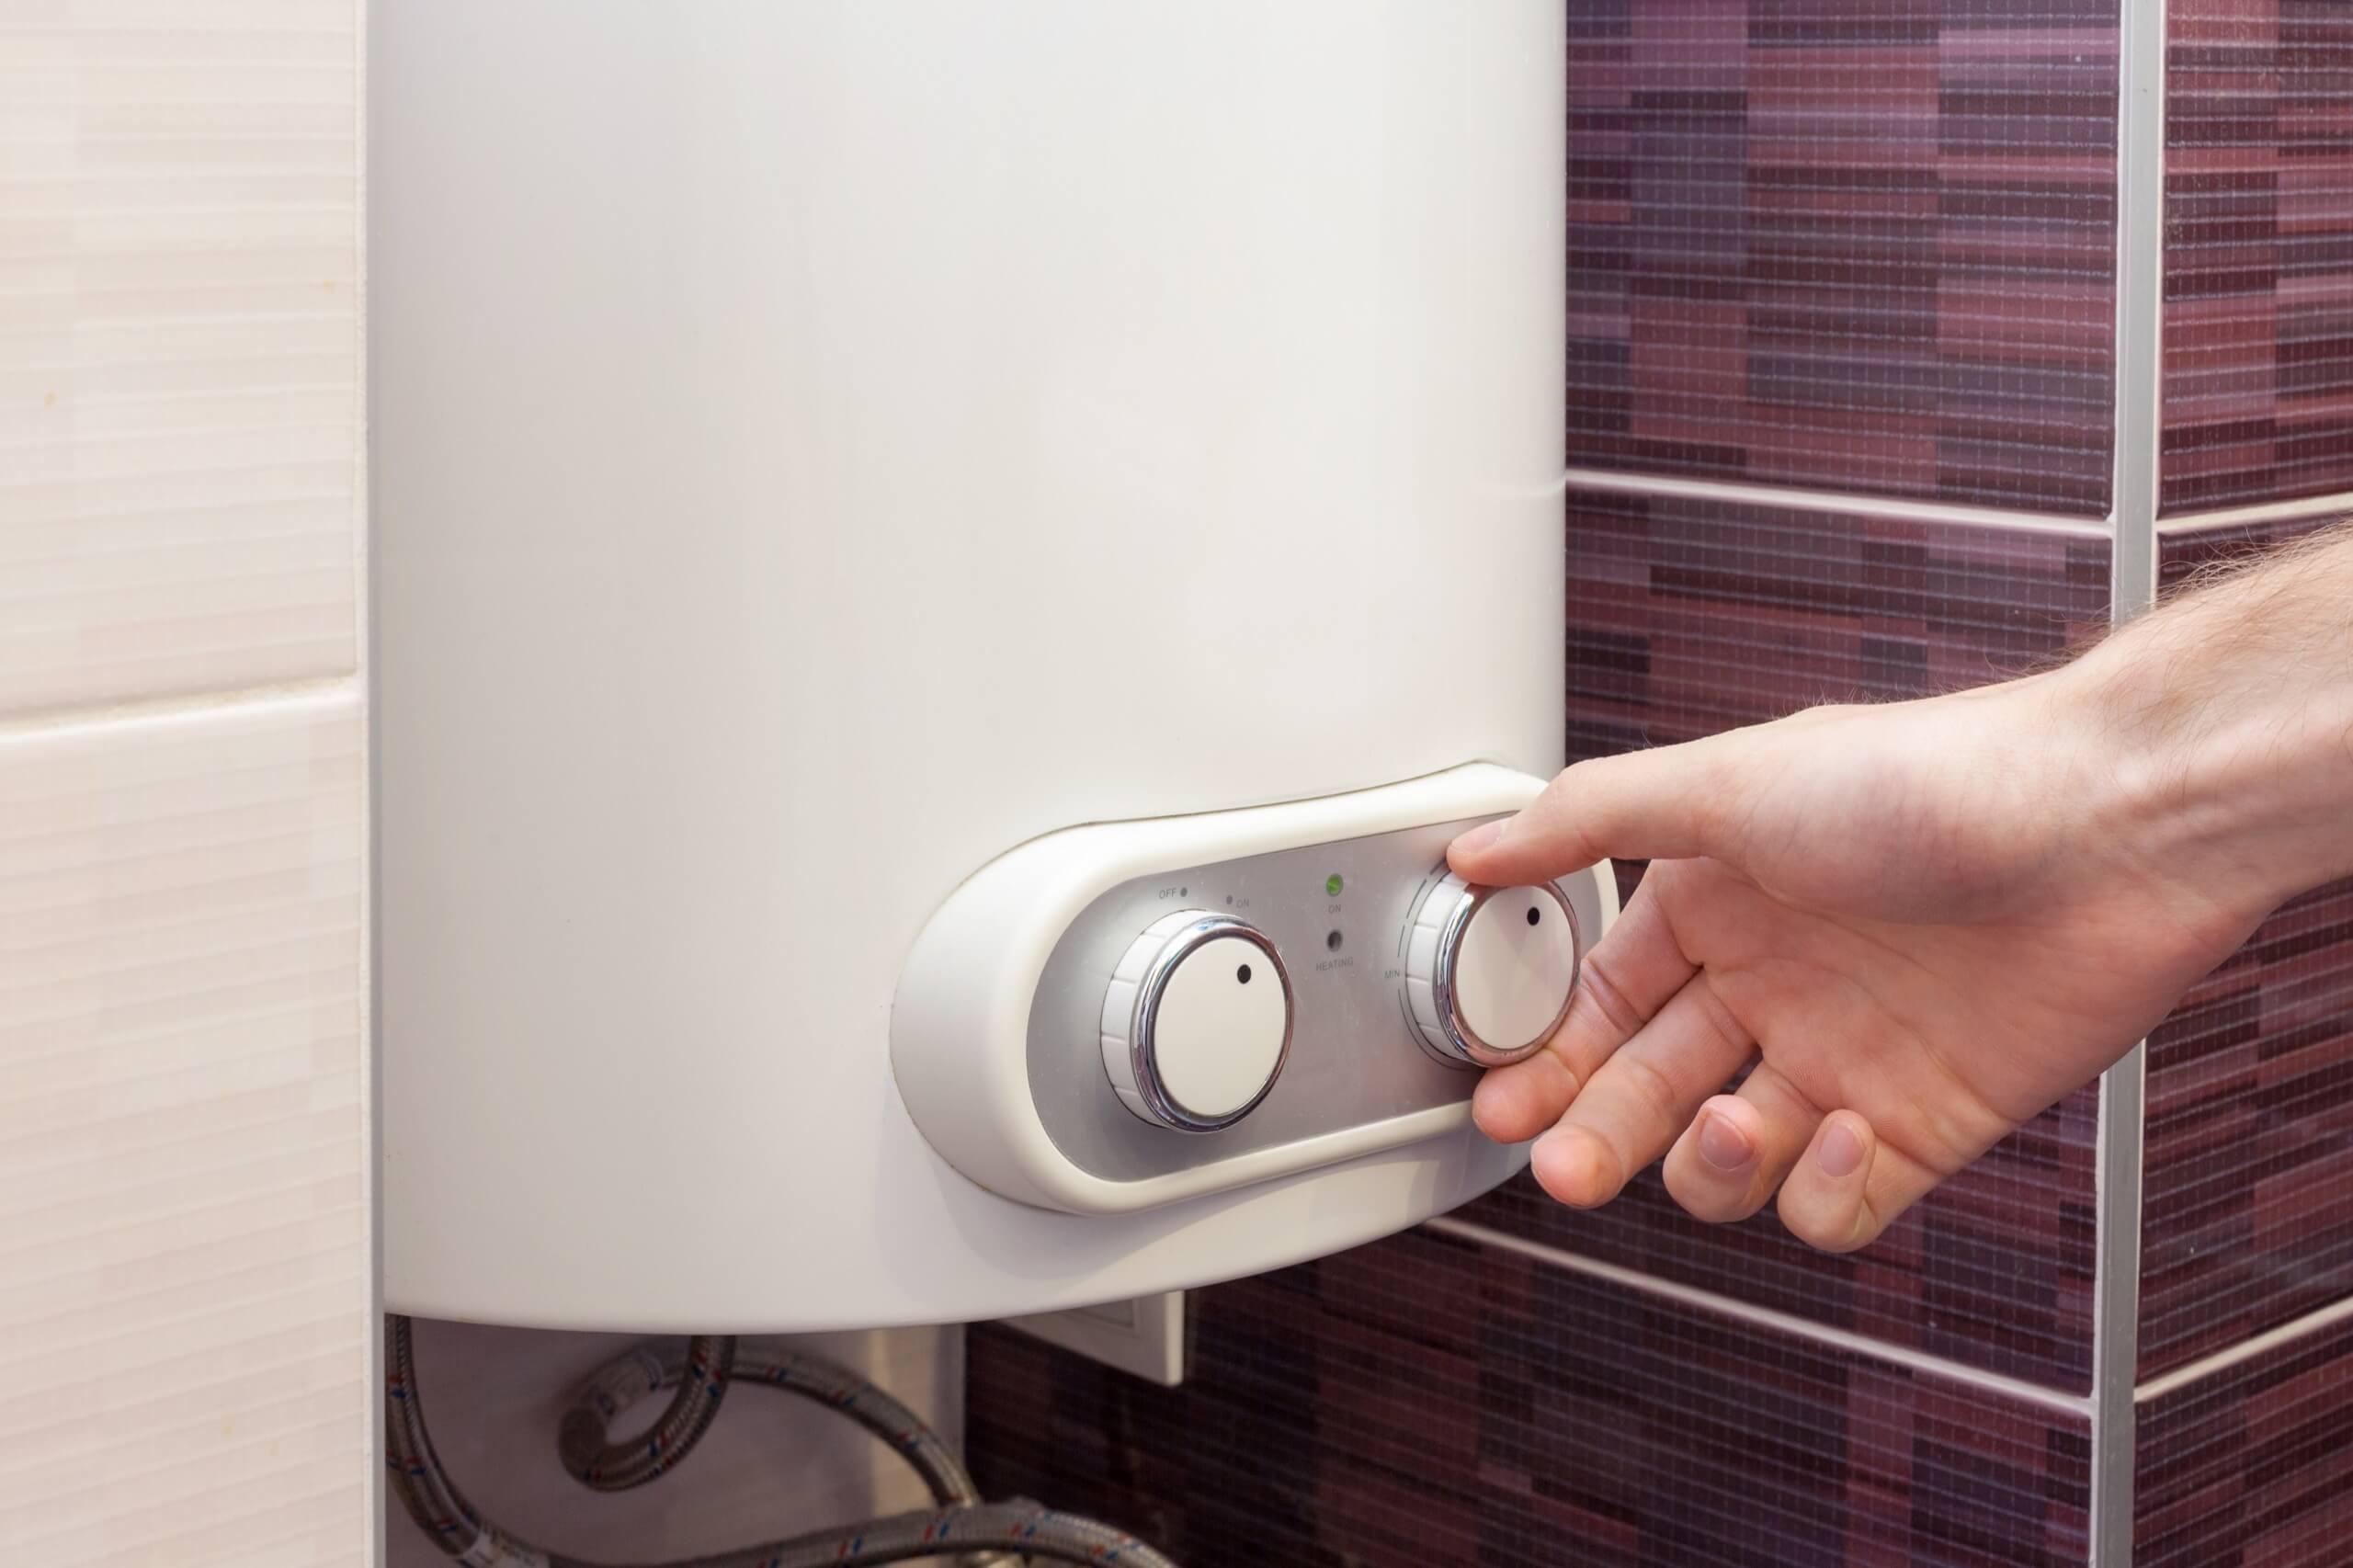 A man's hand adjusts the temperature setting on an electric water heater.